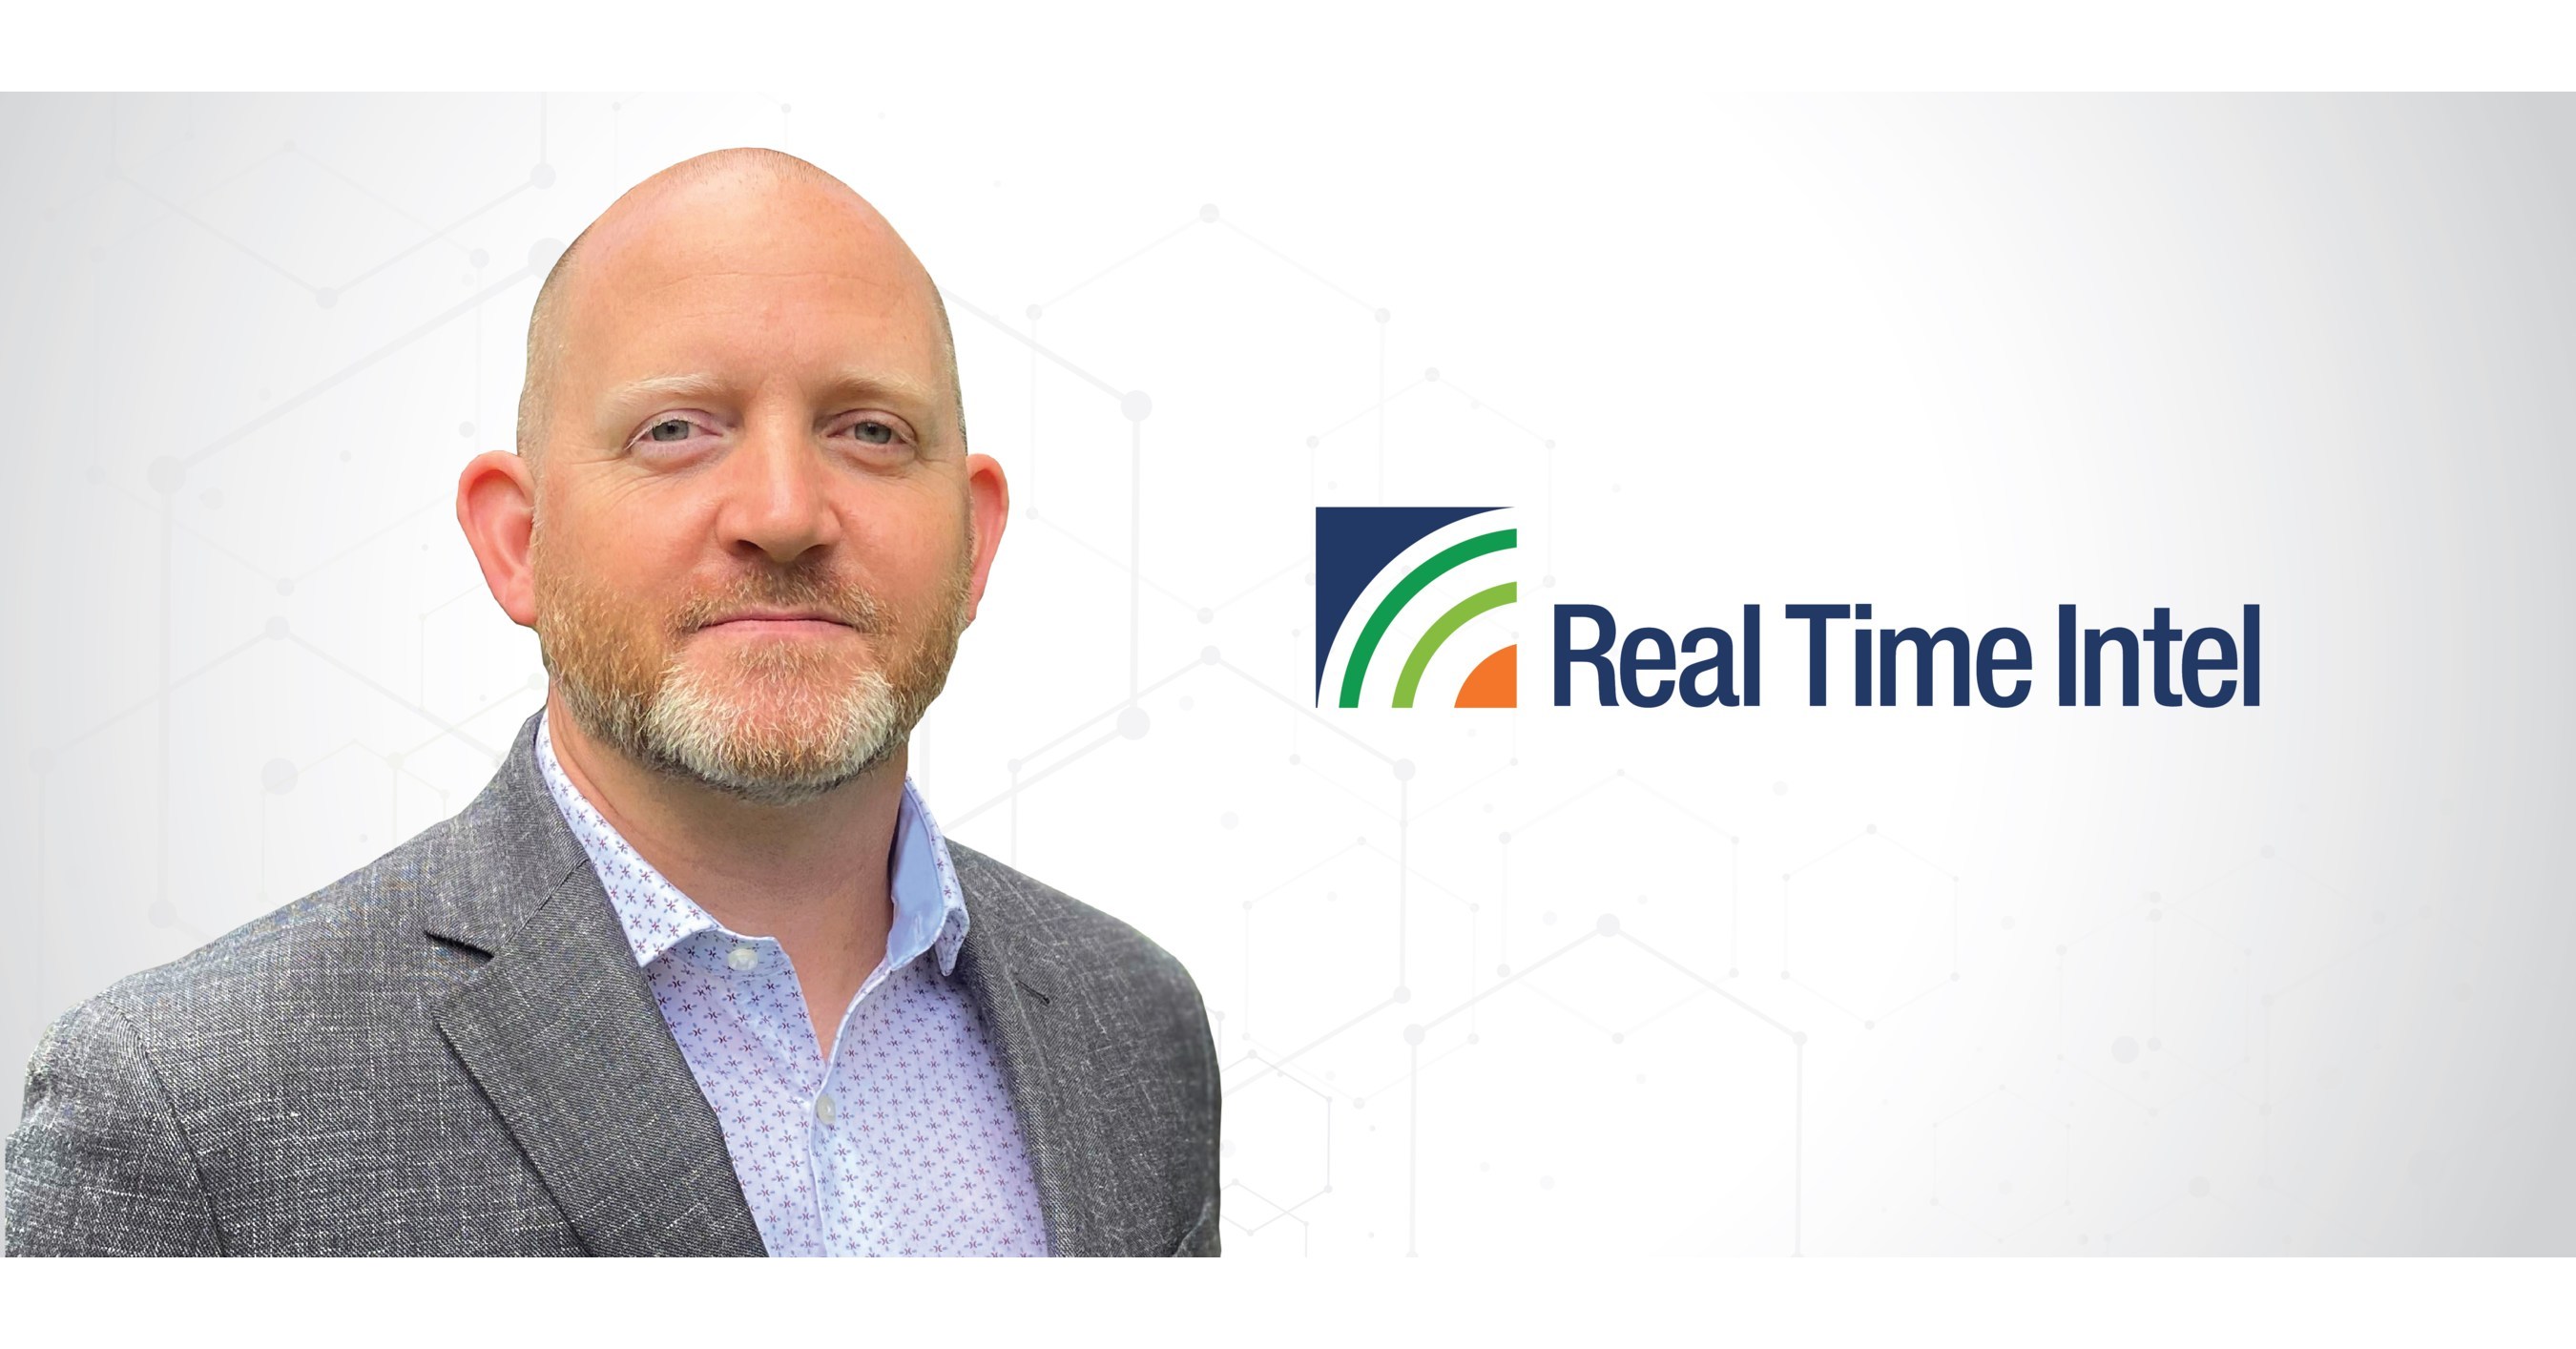 Supply Chain Visibility leader, Real Time Intel, names new Chief Strategy Officer